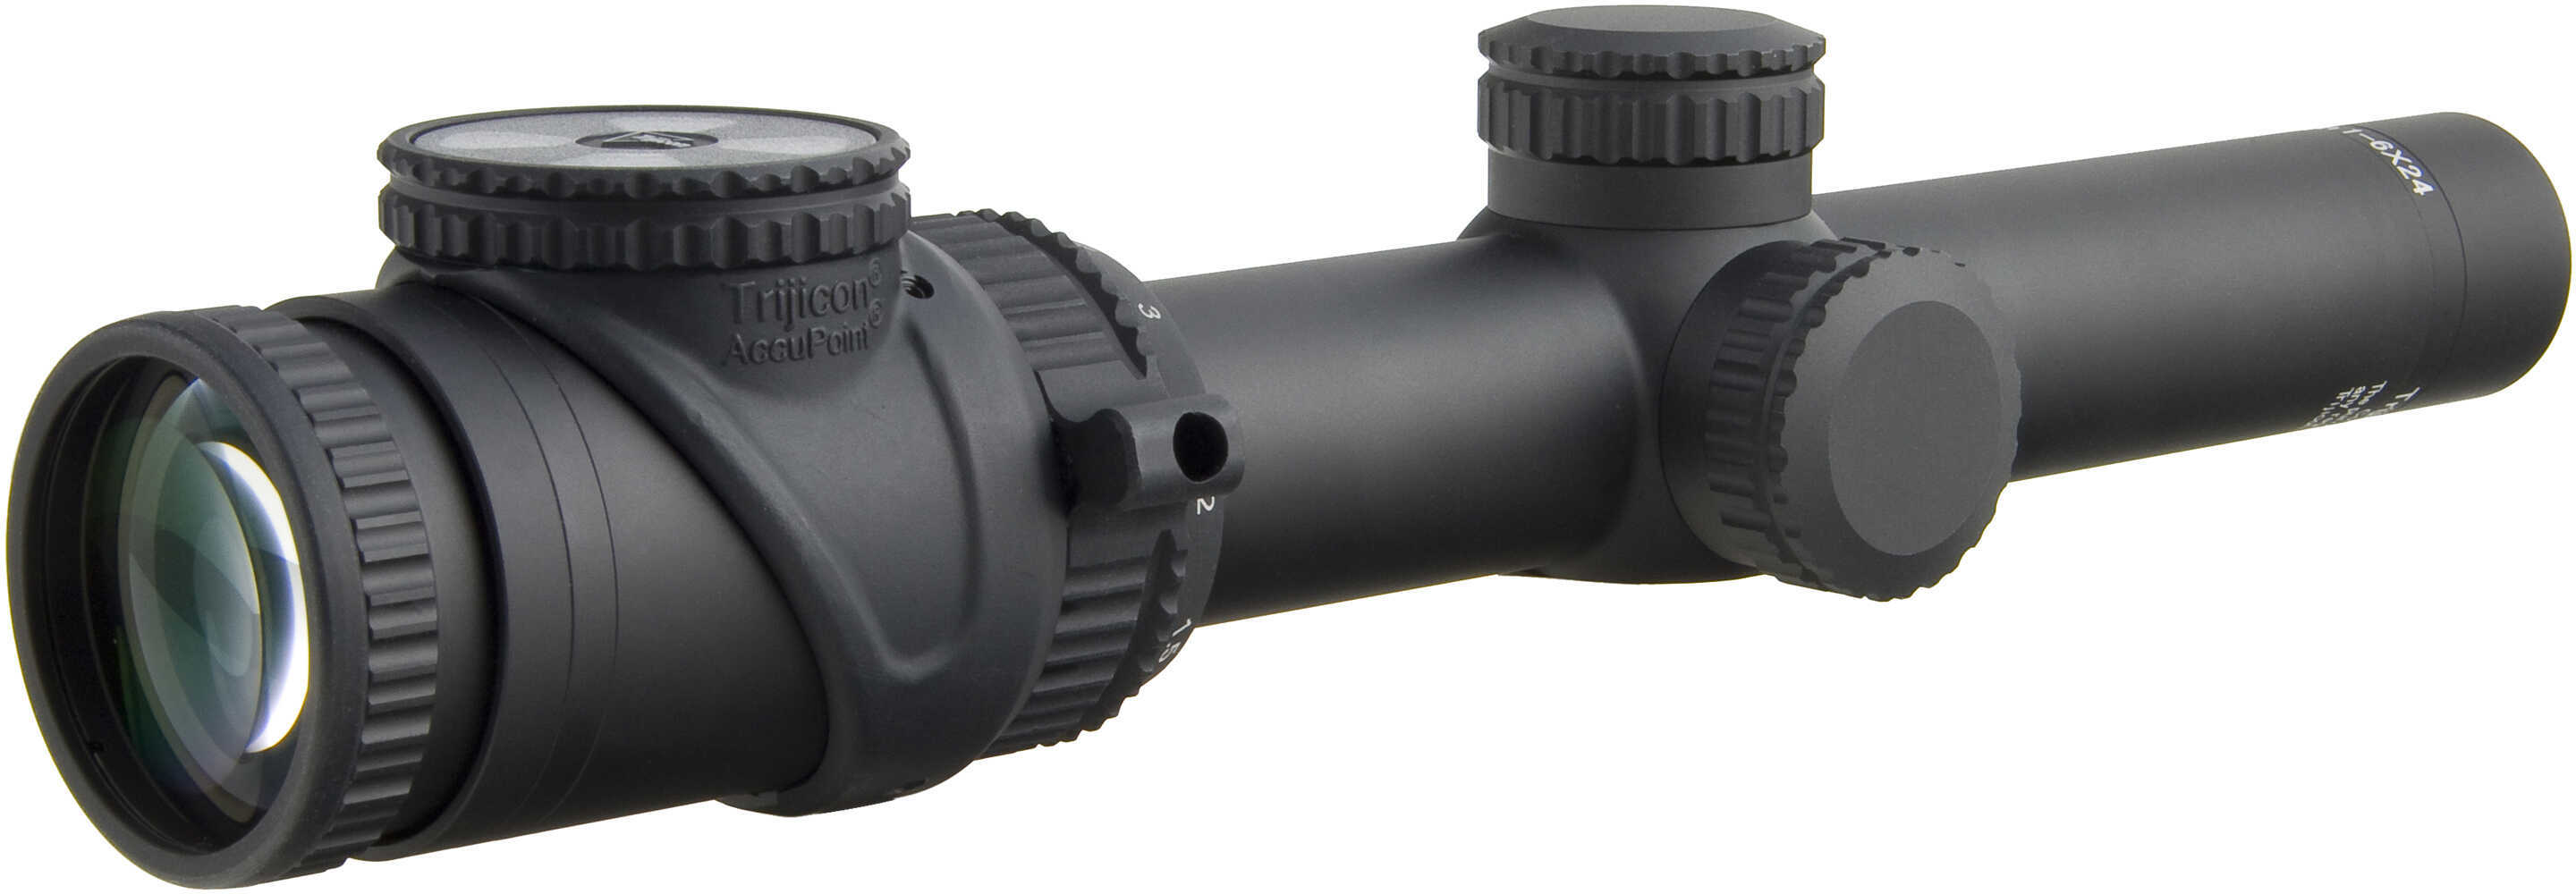 Trijicon Accupoint 1-6x24 MOA-Dot Crosshair,Green Dot, 30mm Md: TR25-C-200089